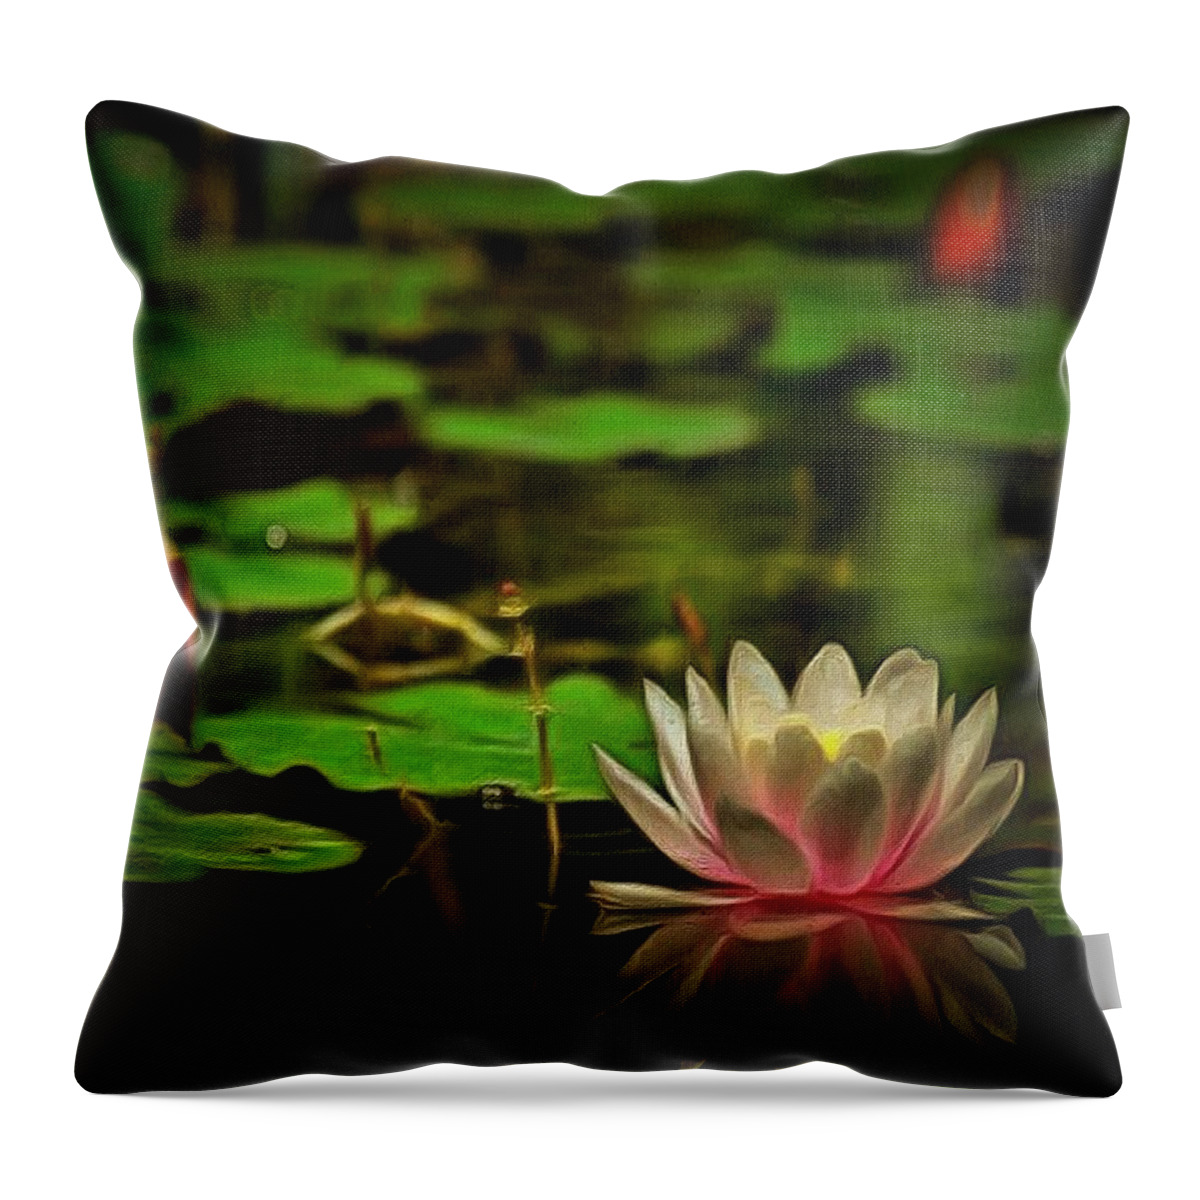 Waterliliy Throw Pillow featuring the digital art Lily Pond by Charmaine Zoe